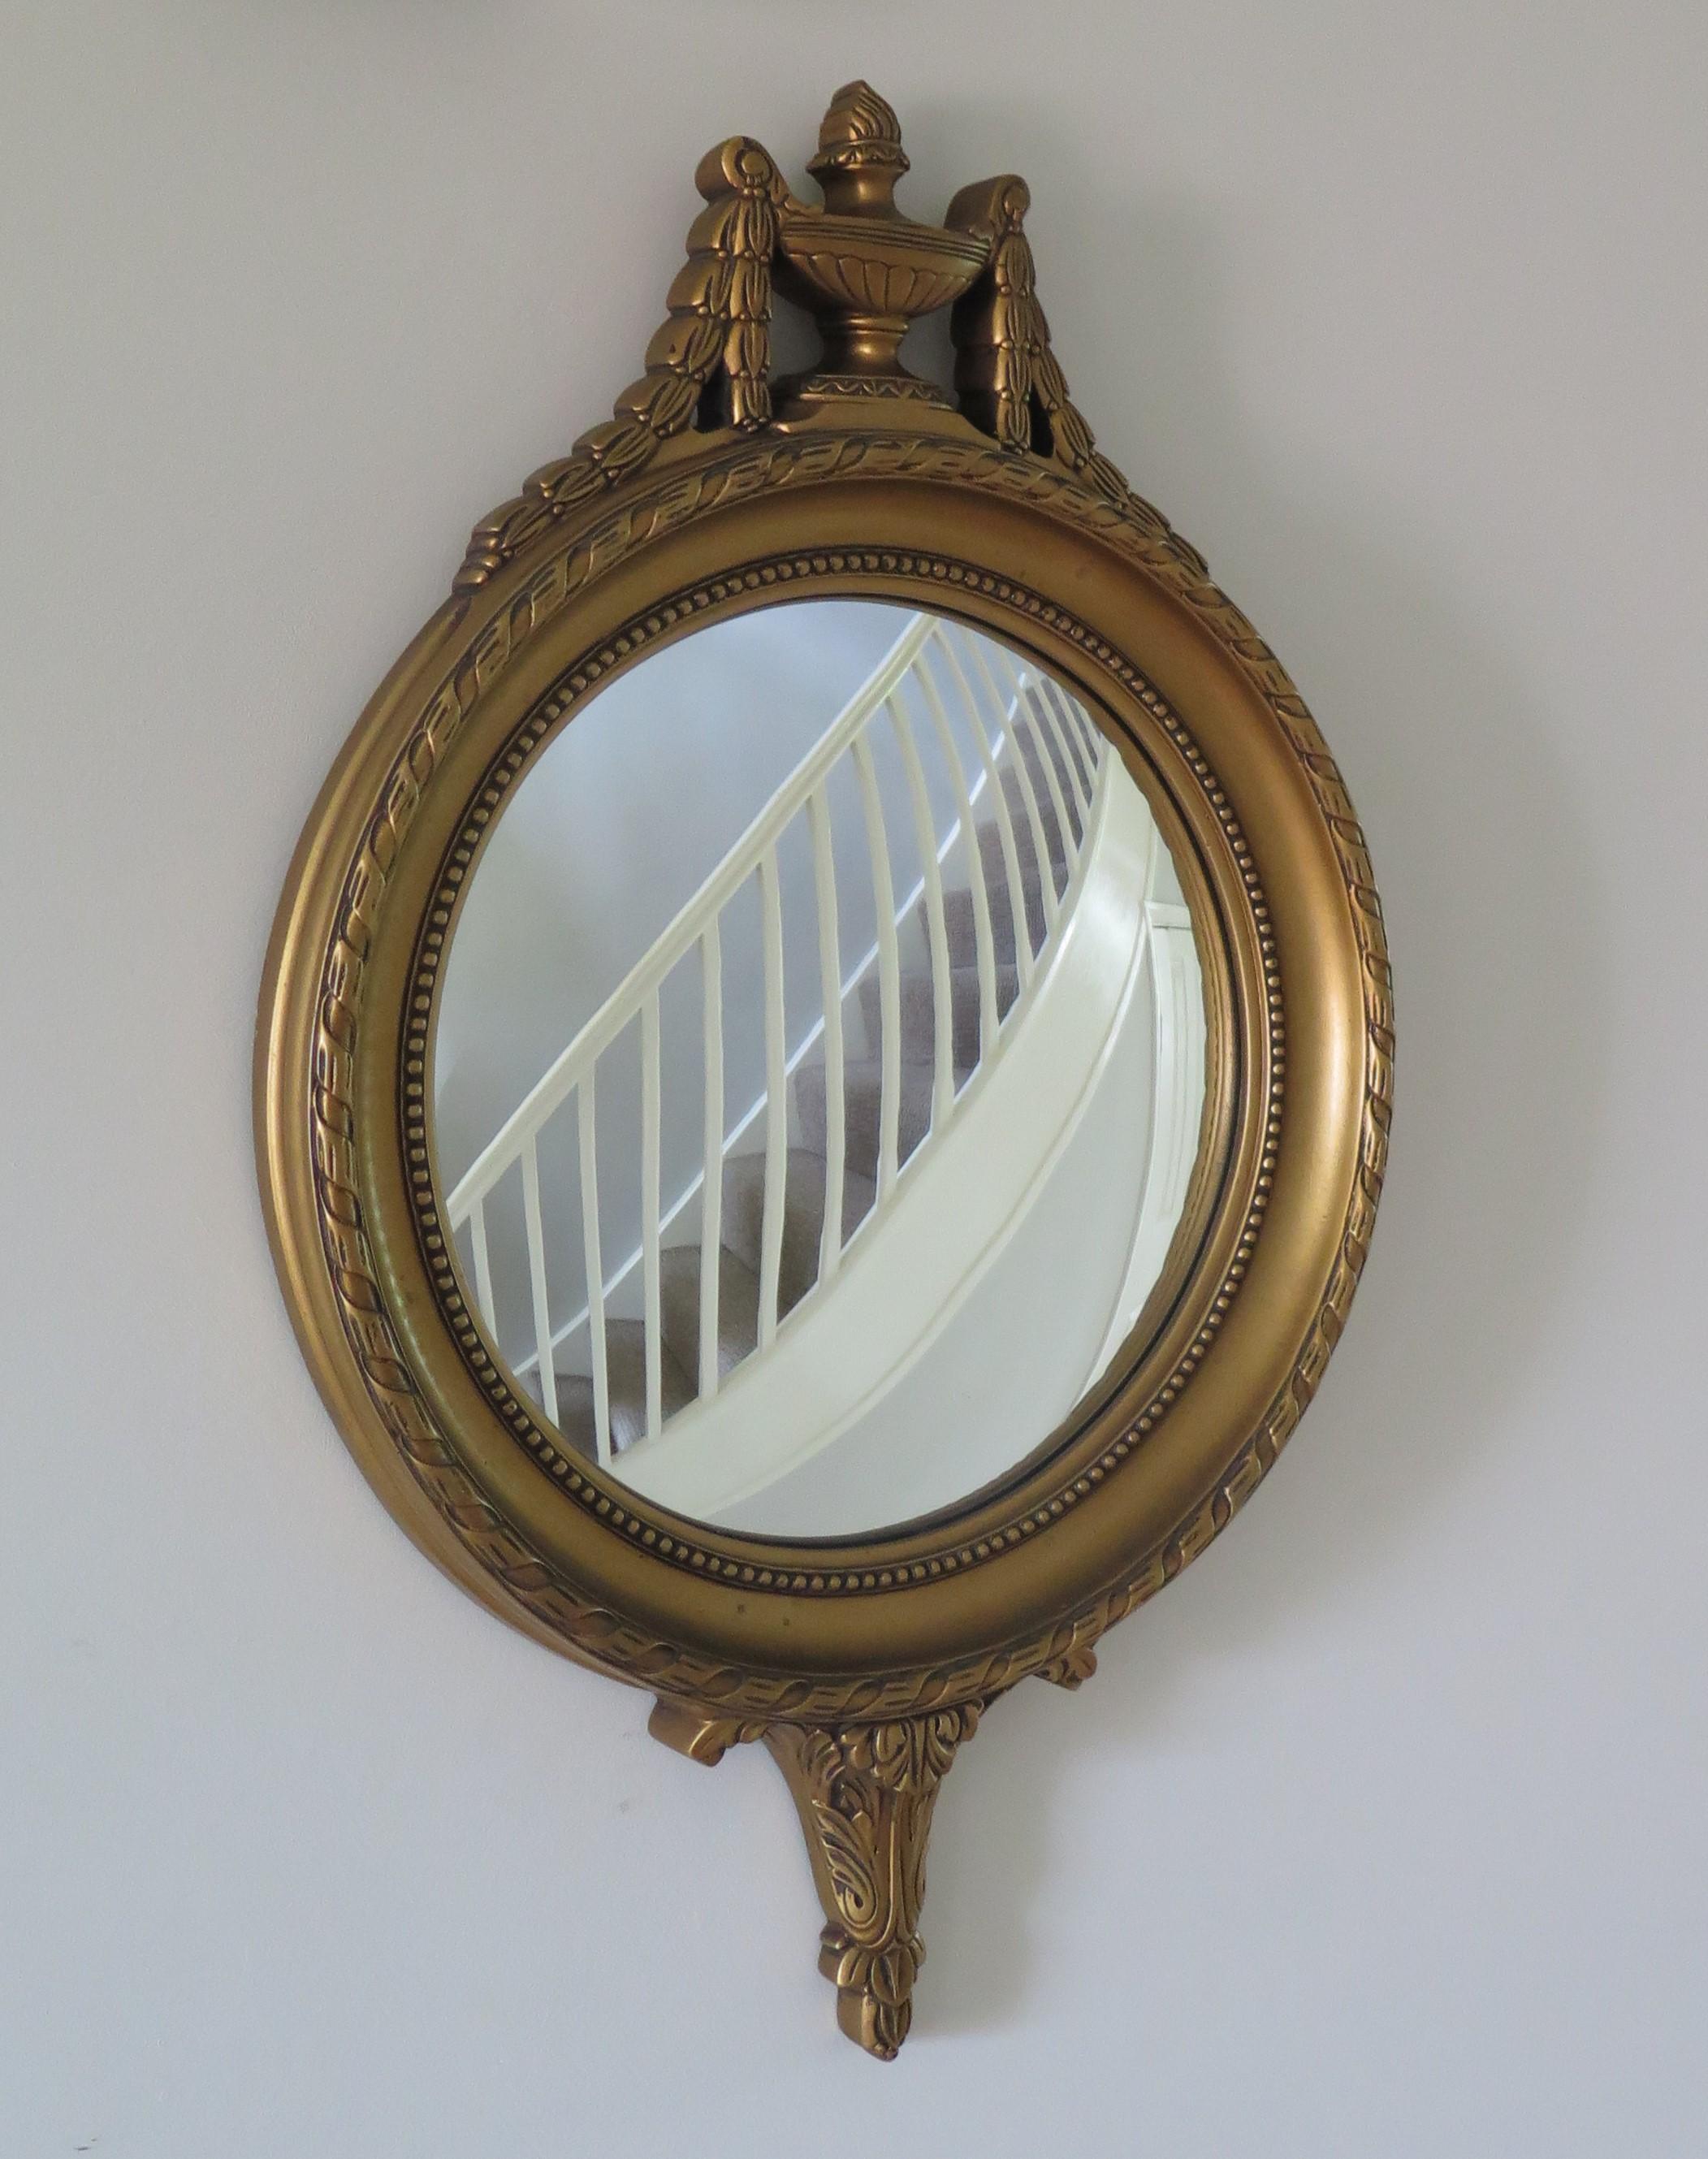 20th Century French Convex Wall Mirror in the Empire Style Gilt Wood, Circa 1930s